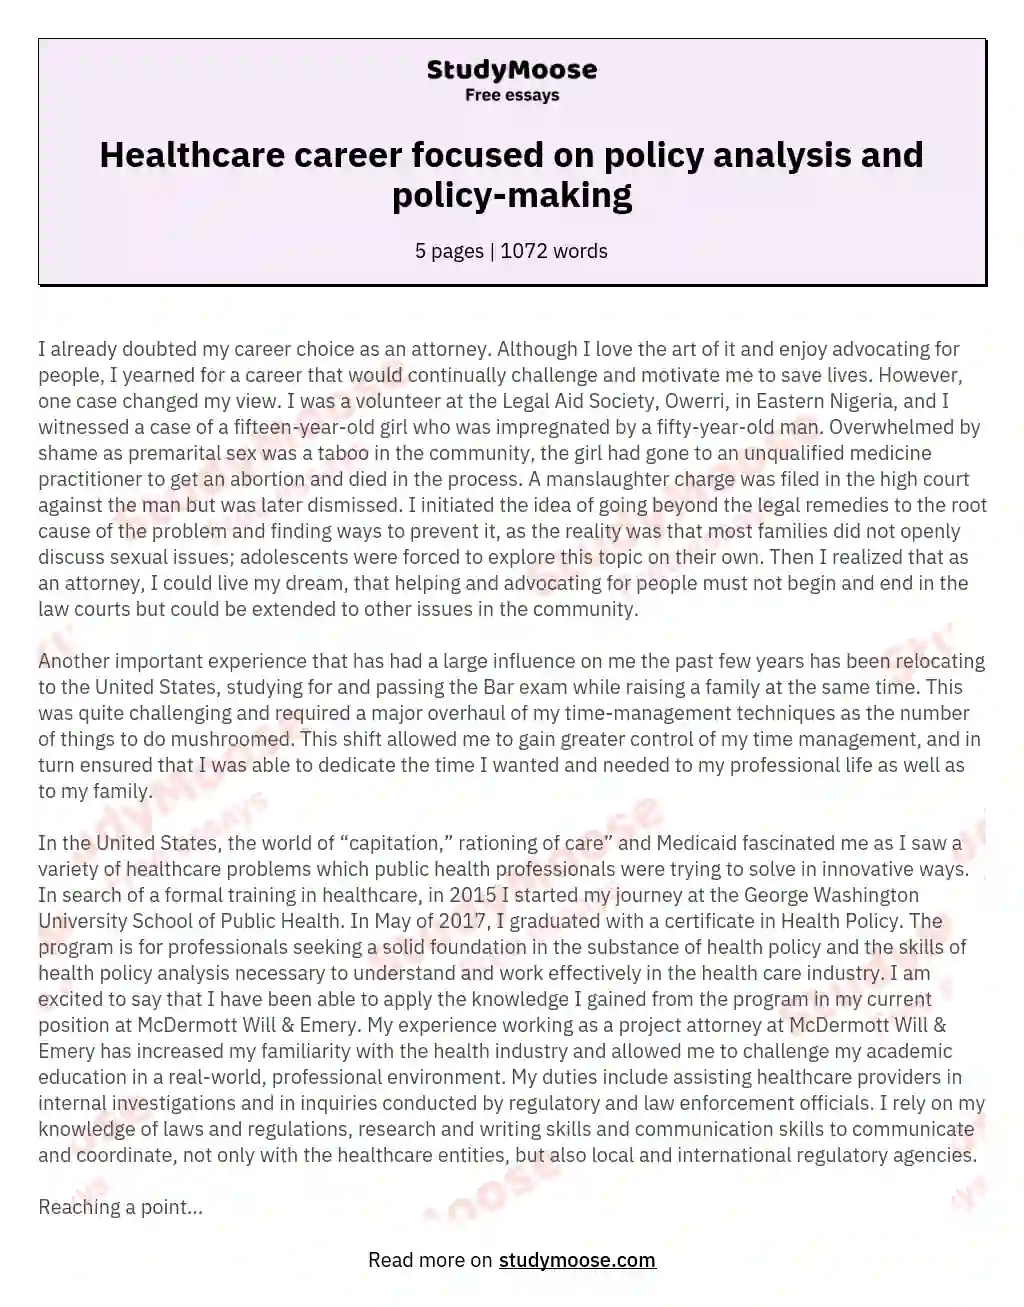 Healthcare career focused on policy analysis and policy-making essay